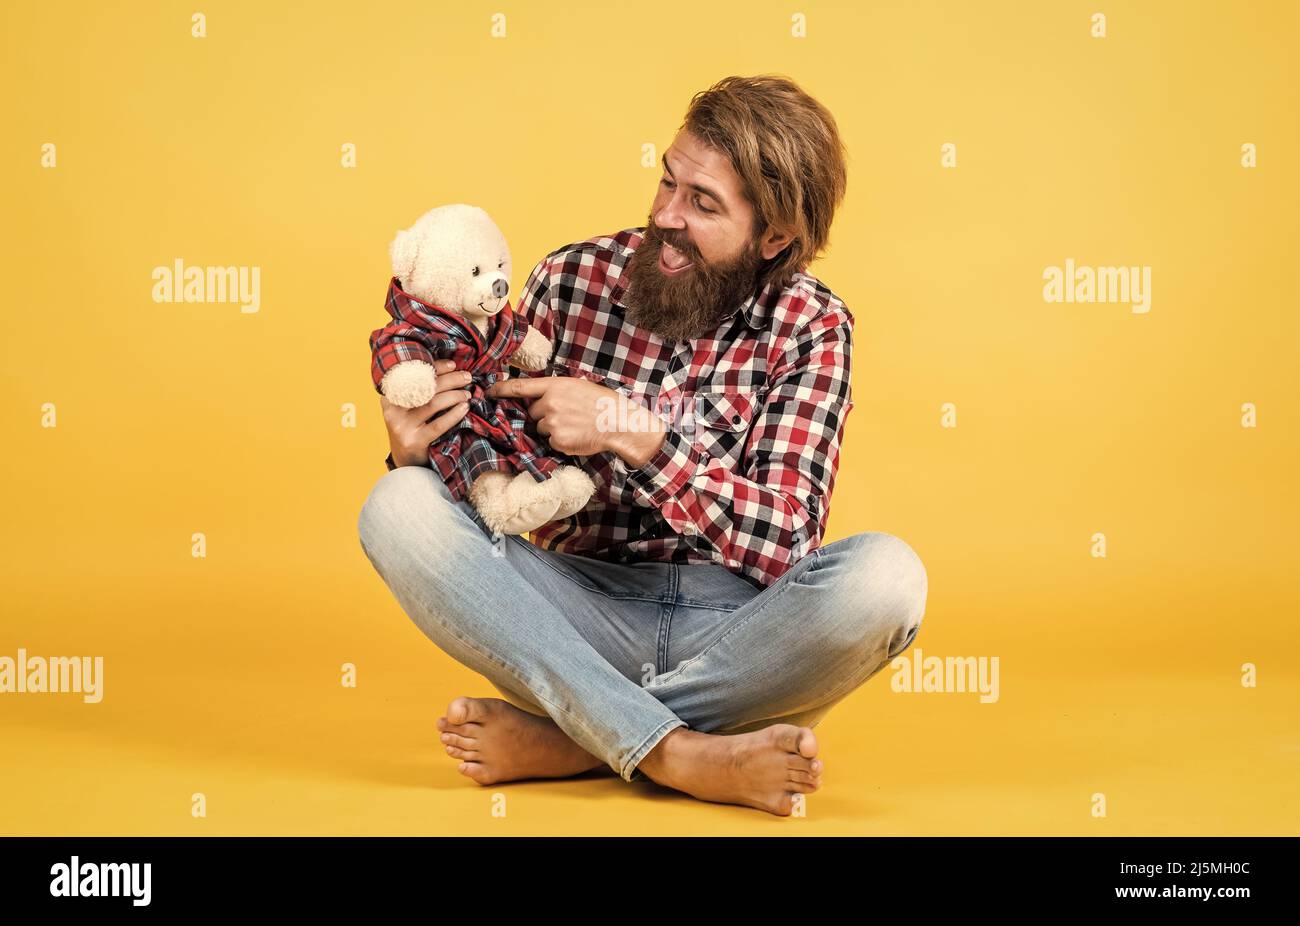 brutal bearded man wear checkered shirt having lush beard and moustache with teddy bear toy, valentines day Stock Photo